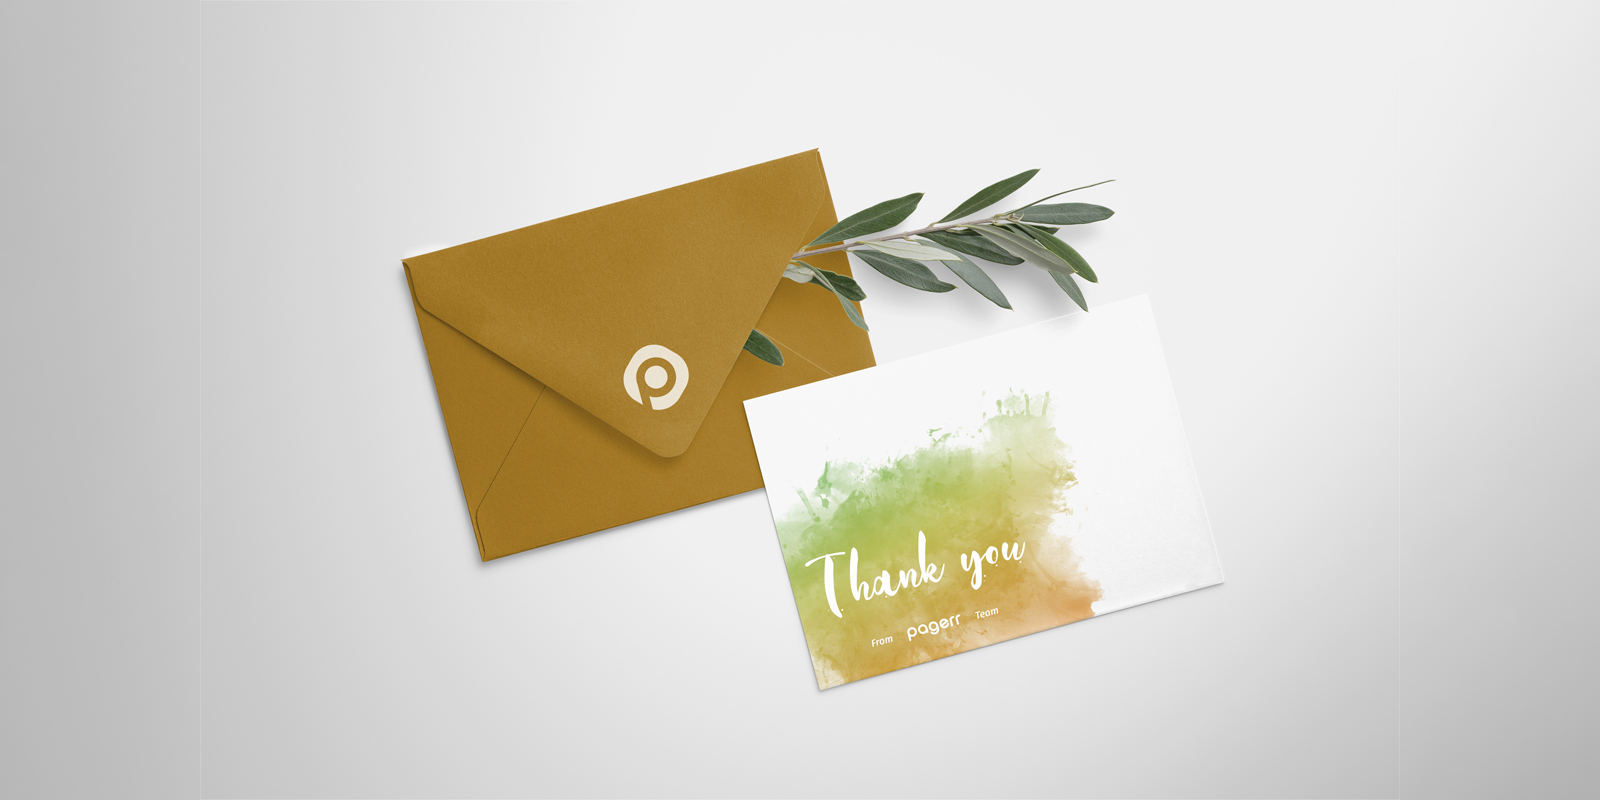 Thank you cards in Melbourne - Print with Pagerr